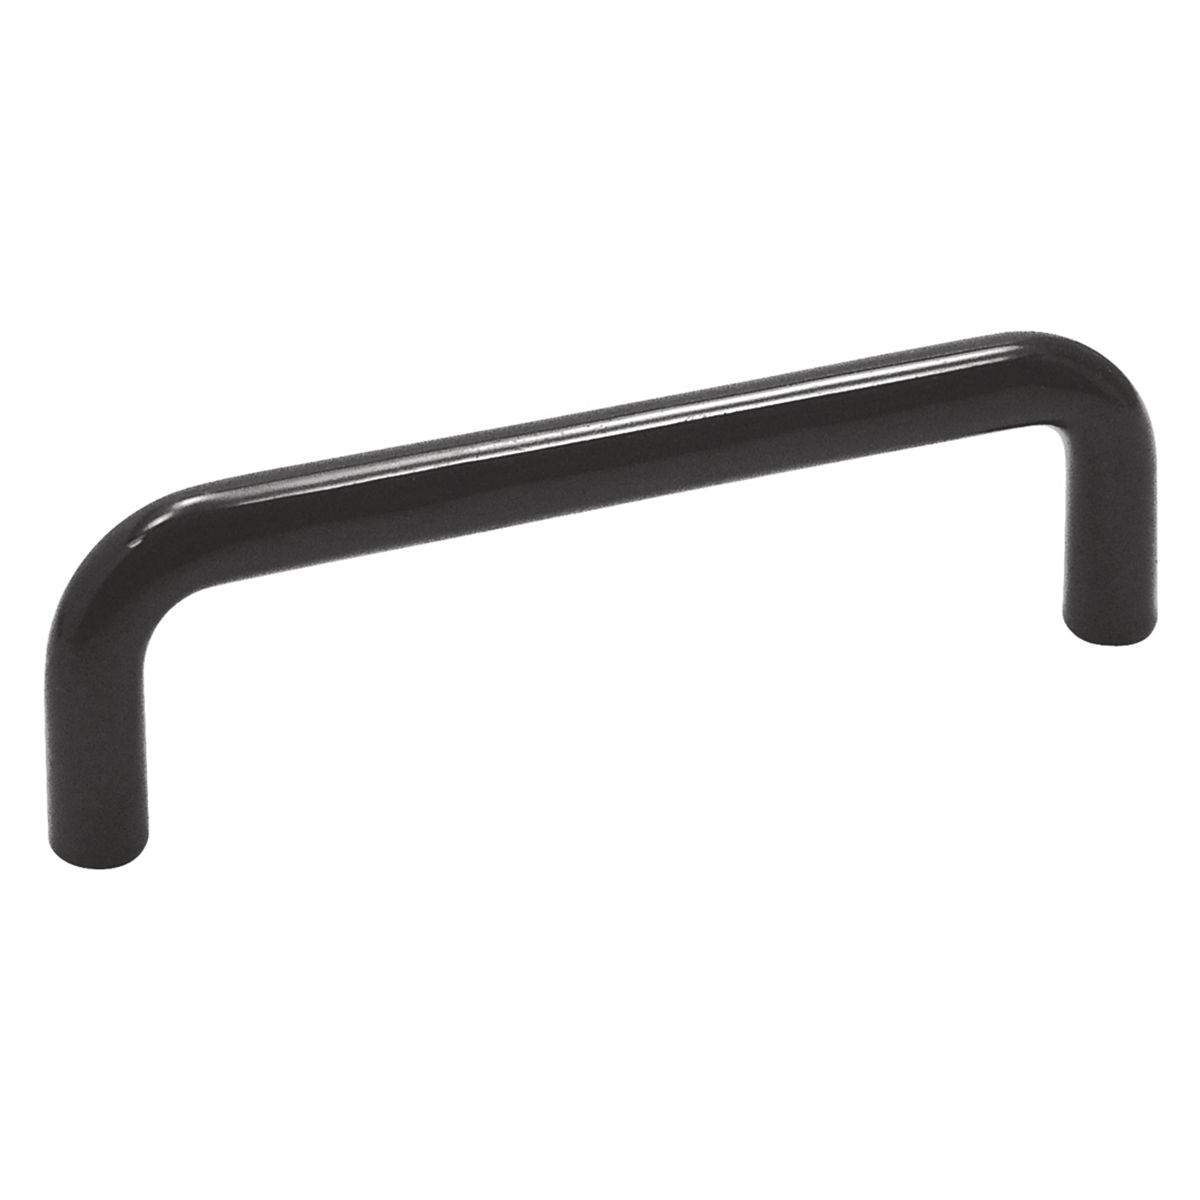 Hickory Hardware Pw354 22 Black Midway, 3 1 2 Inch Cabinet Pulls Black